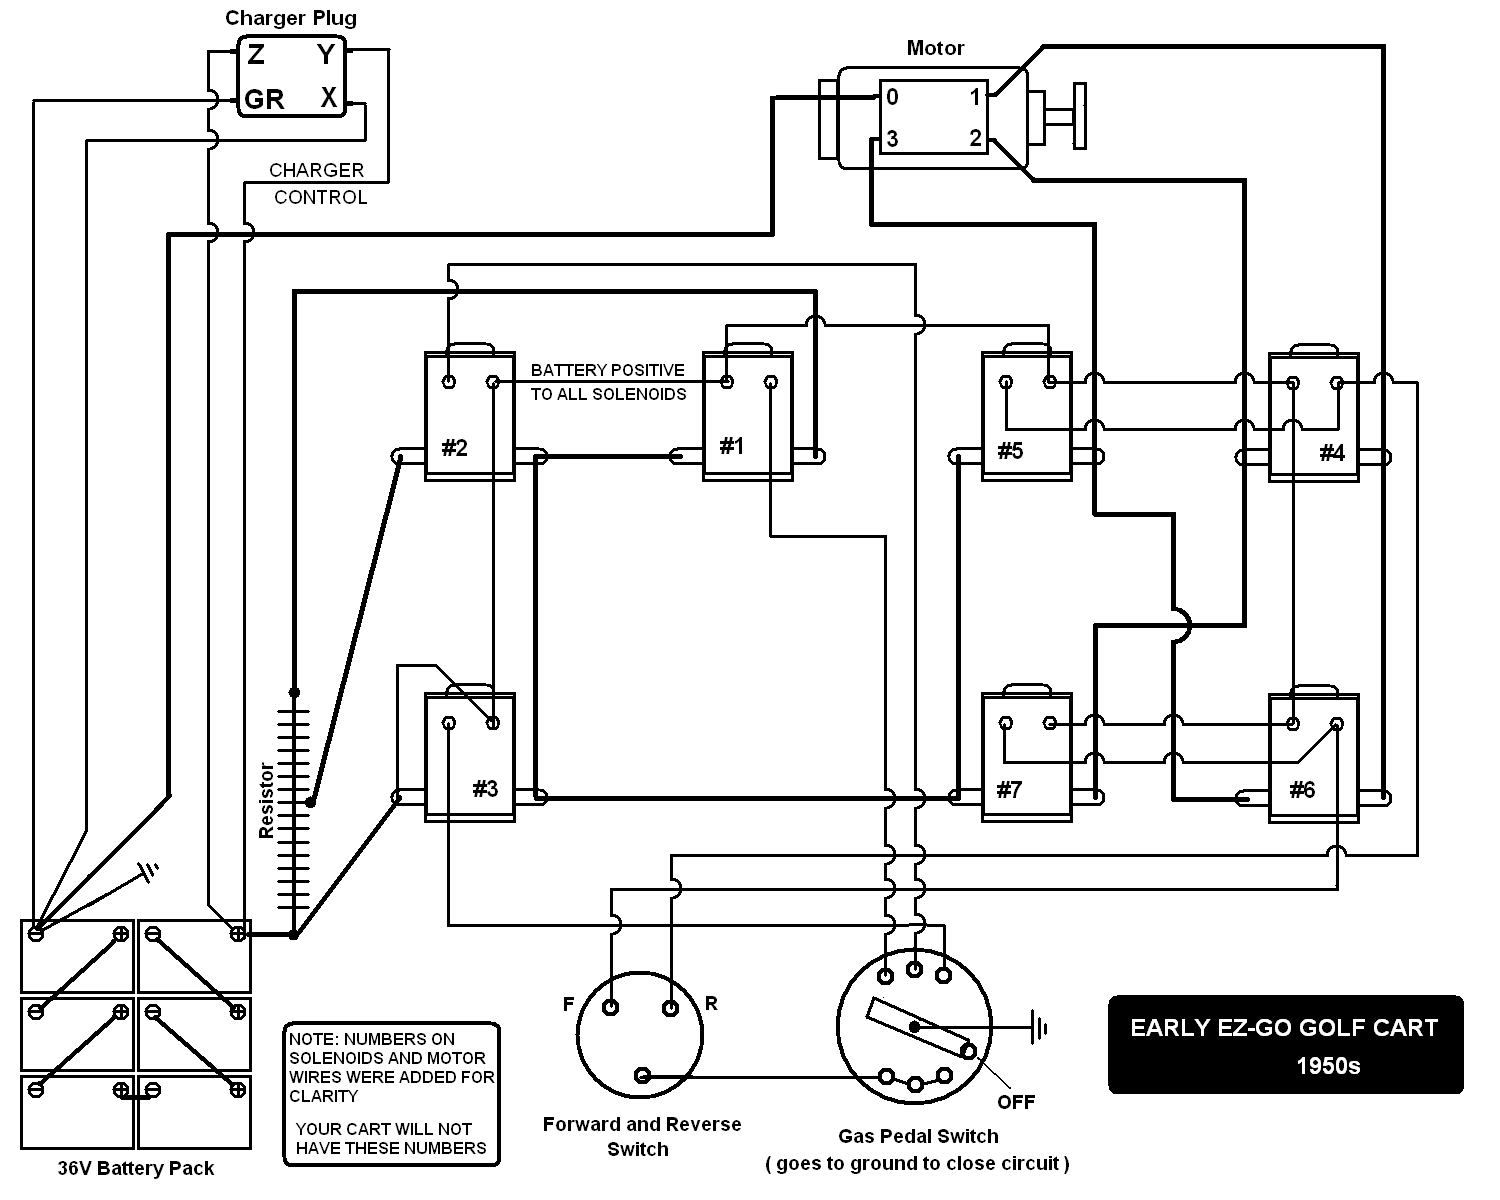 wiring diagram powerwise 2 ez go charger